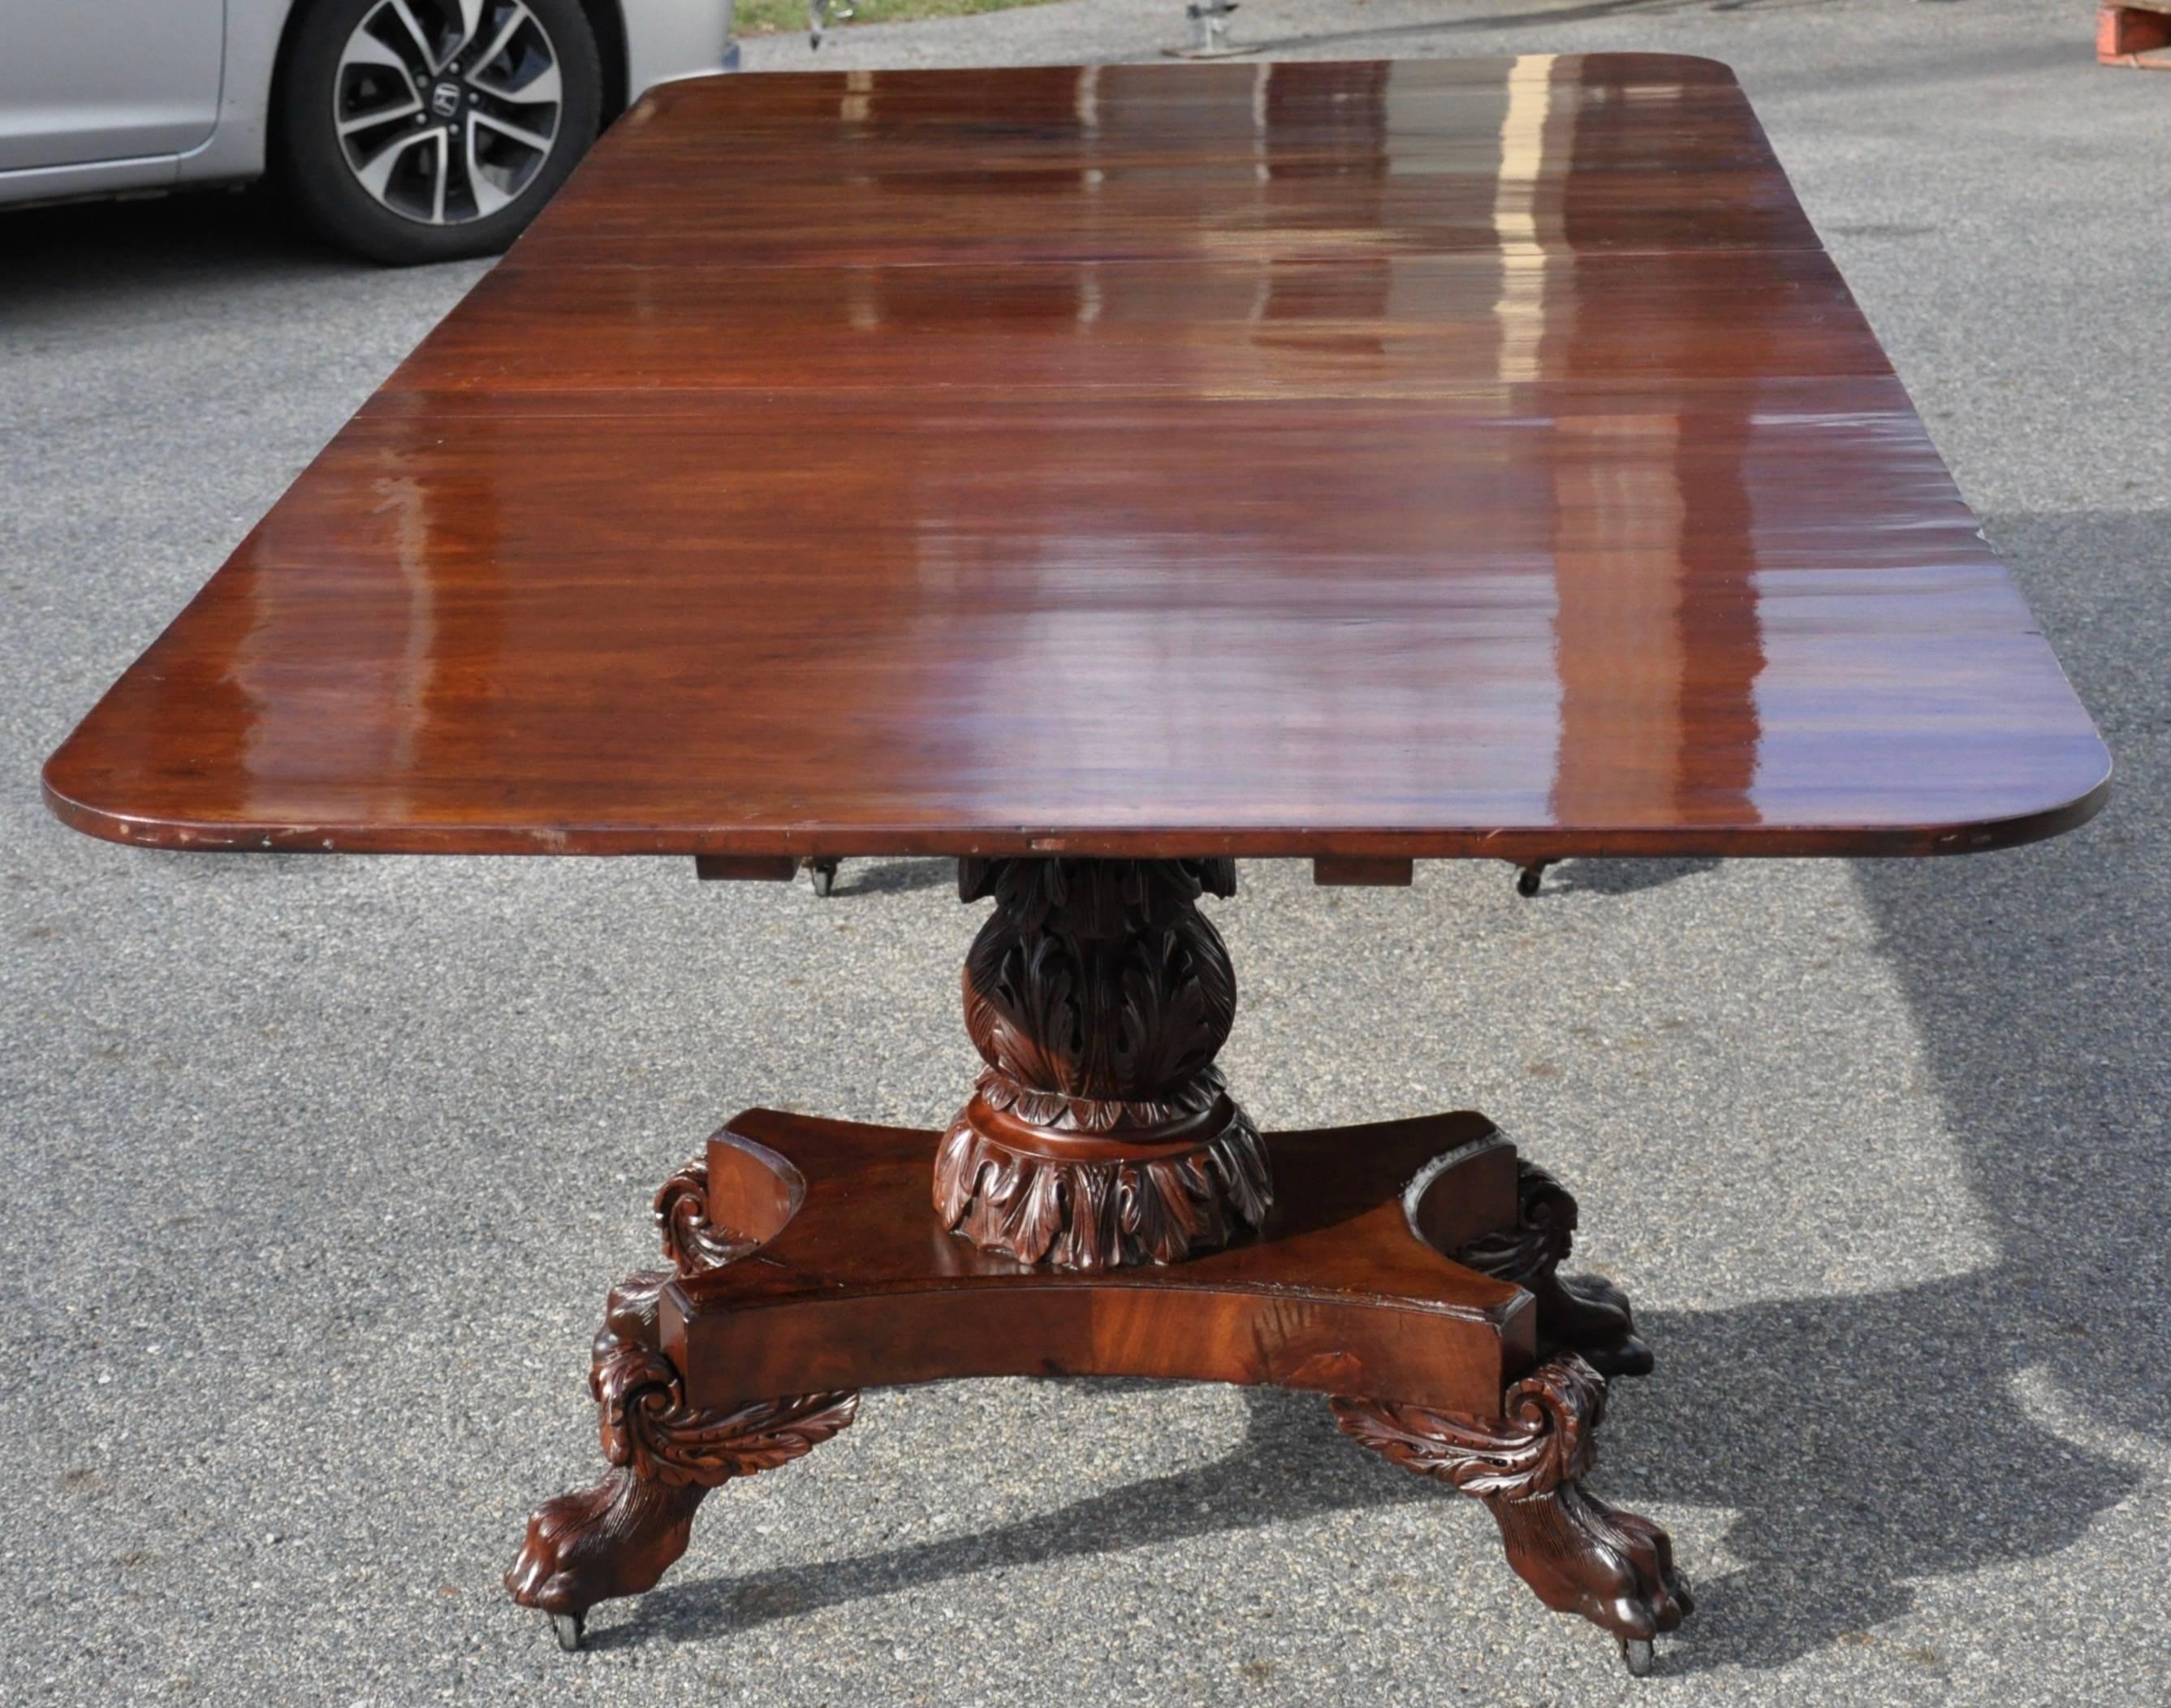 Period American Federal Dining Table, Two Pedestal, Classical Base

--Original Tilt top Mechanism
--Beautiful Original Color and Patina
--Classical or Neoclassical Pedestal
--One Leaf
--New England, Portsmouth, New Hampshire or Newburyport,